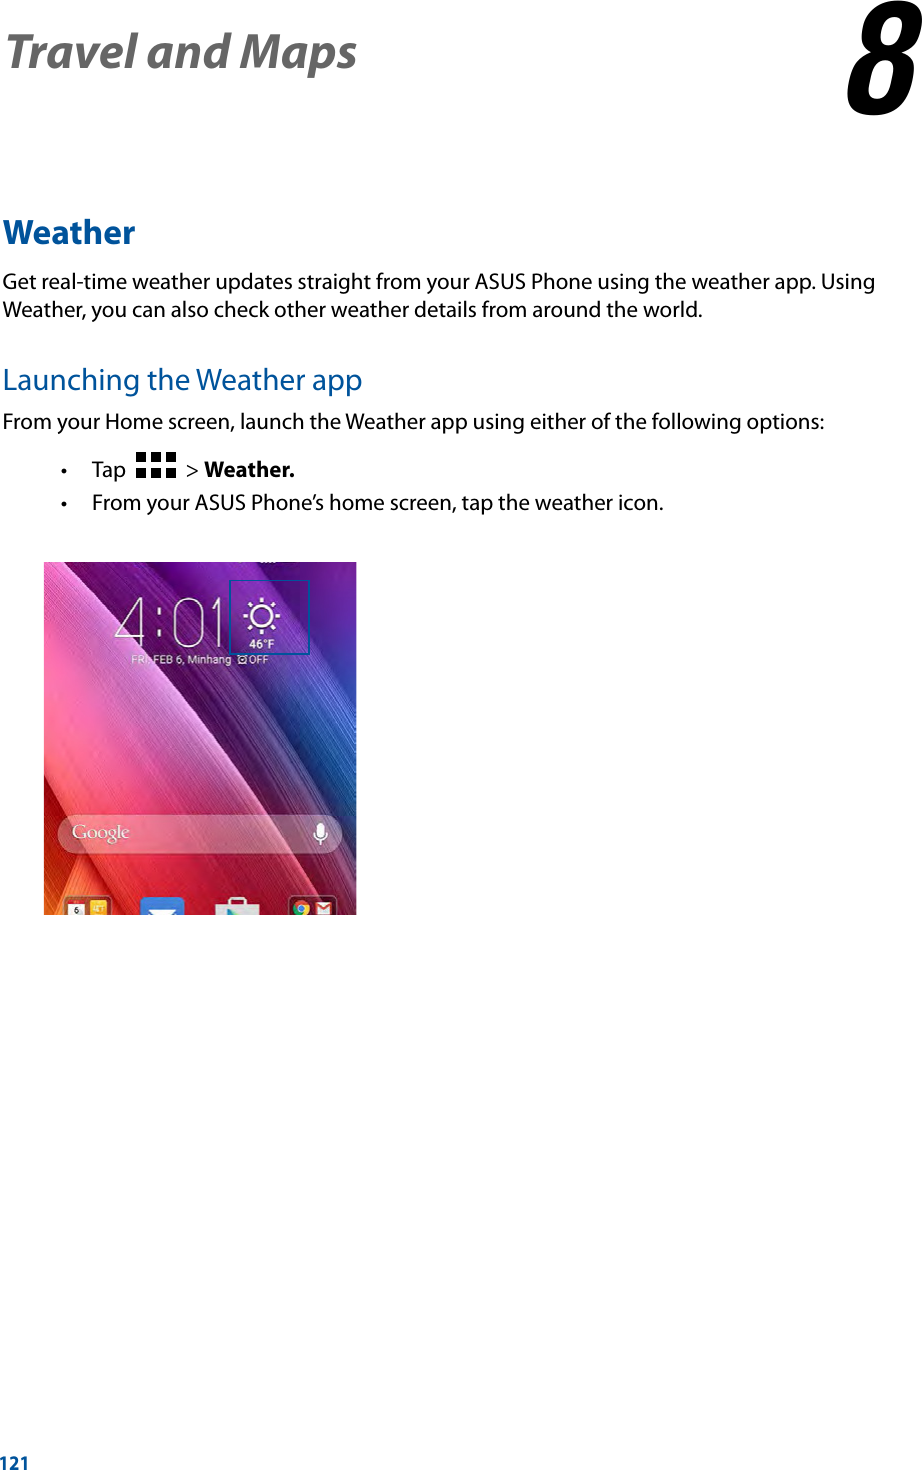 121WeatherGet real-time weather updates straight from your ASUS Phone using the weather app. Using Weather, you can also check other weather details from around the world. Launching the Weather appFrom your Home screen, launch the Weather app using either of the following options: Tap     &gt; Weather. From your ASUS Phone’s home screen, tap the weather icon.Travel and Maps 88  Travel and Maps